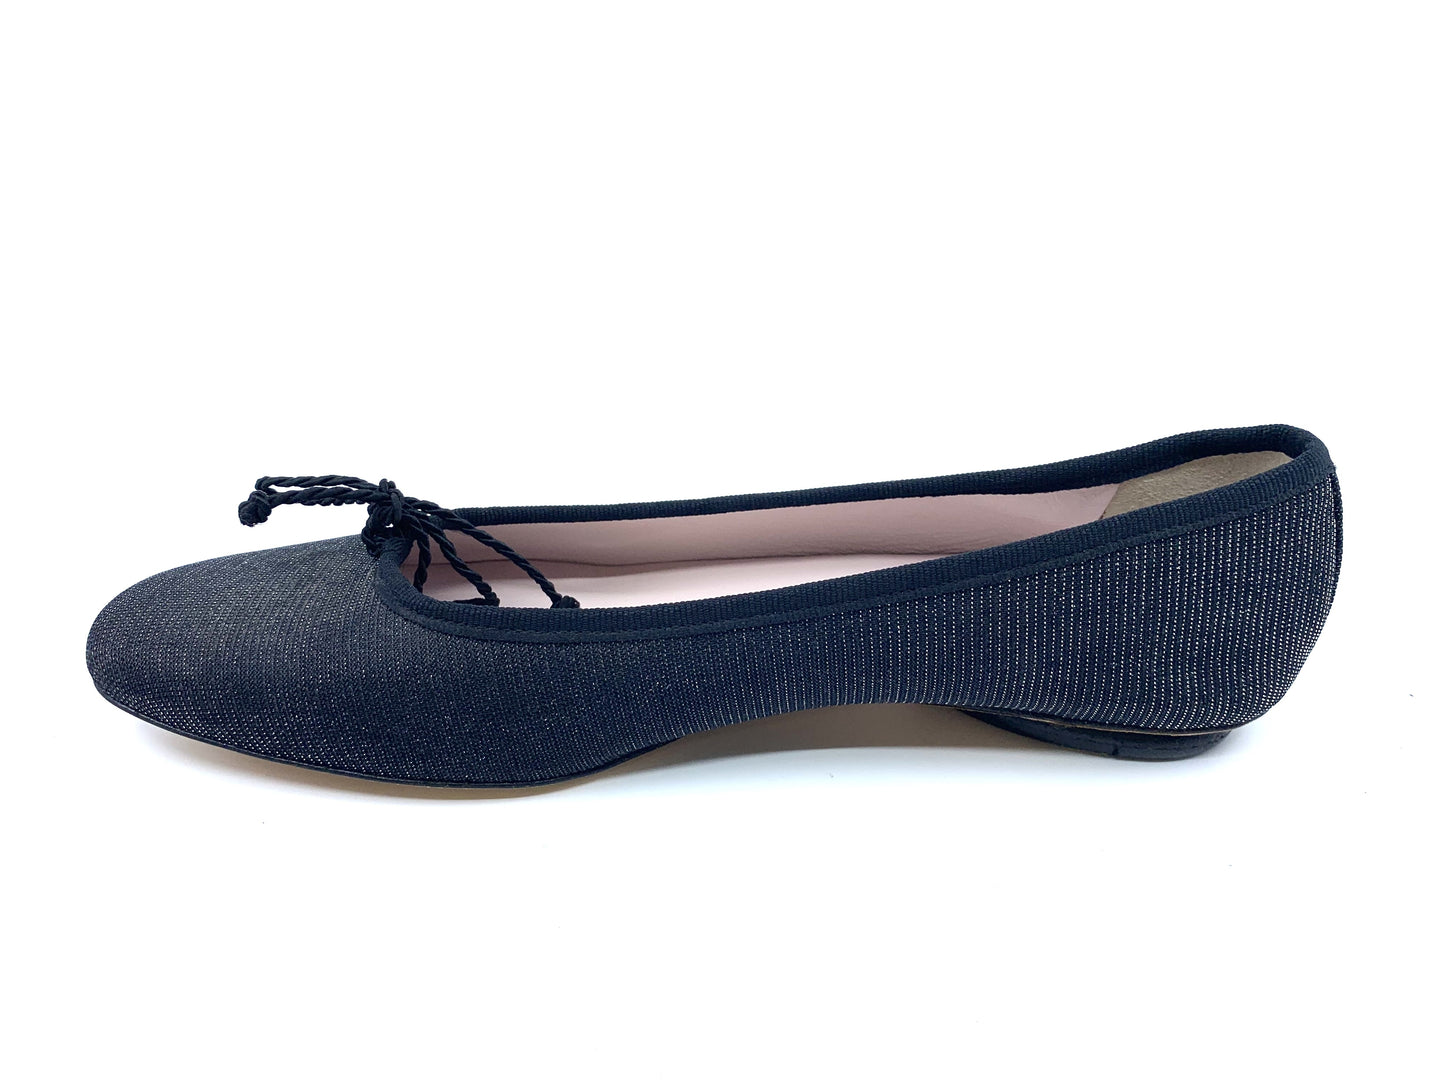 Country Black Notturno Fabric Paul Mayer Ballet Flats